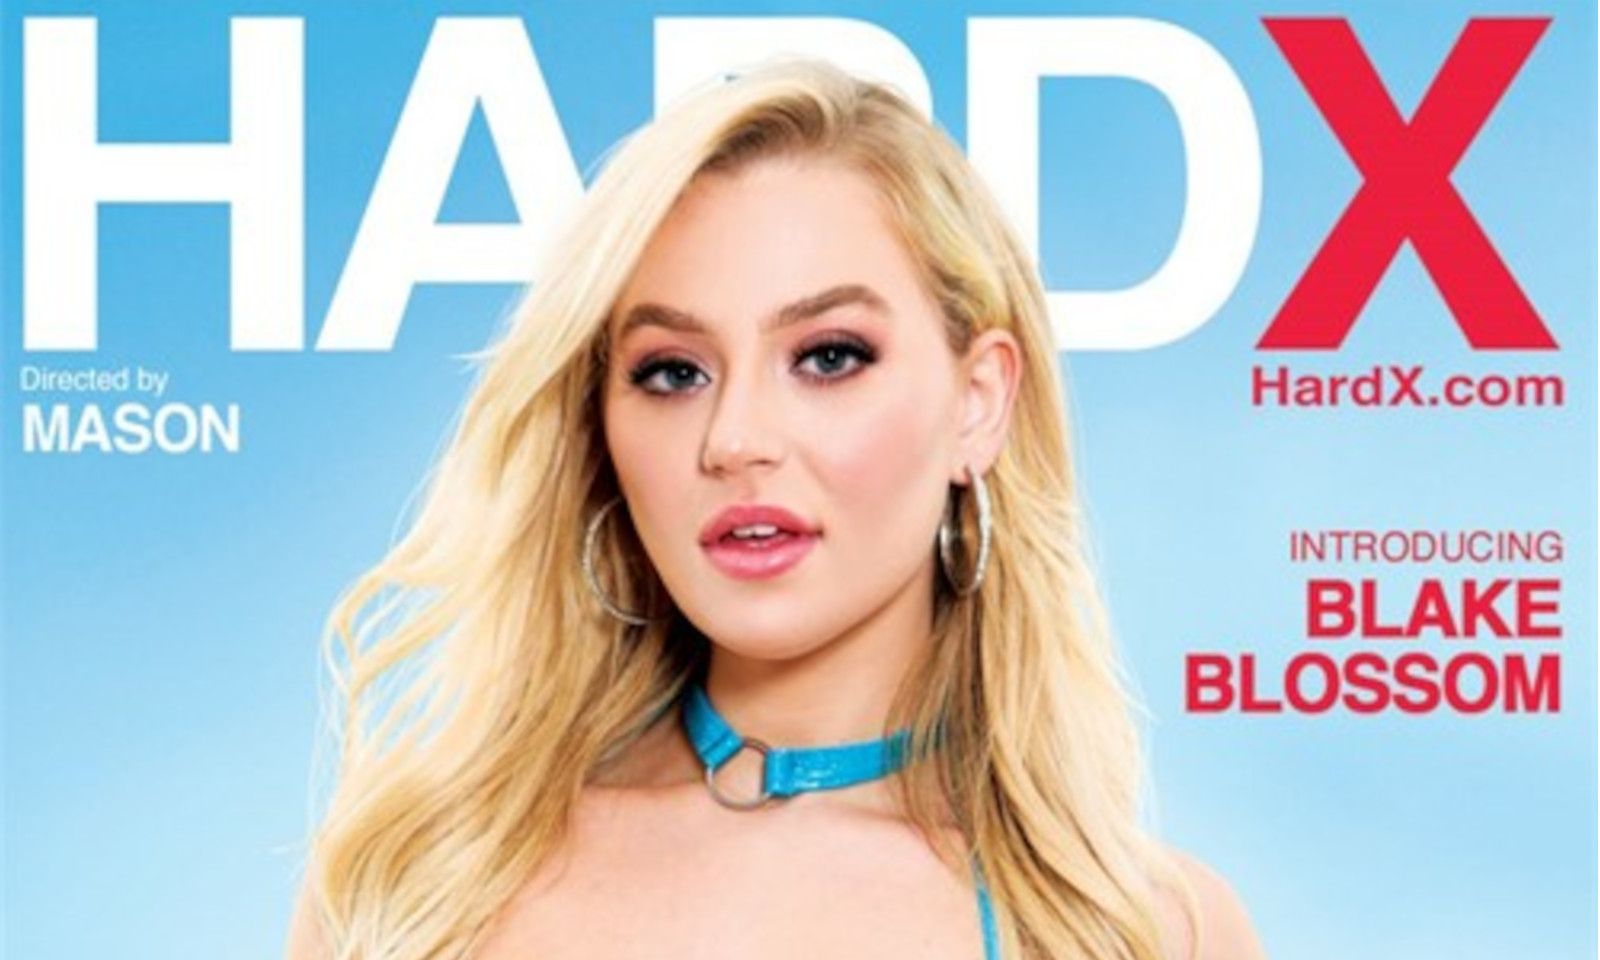 Newcomer Blake Blossom Featured on the Cover of New Hard X DVD